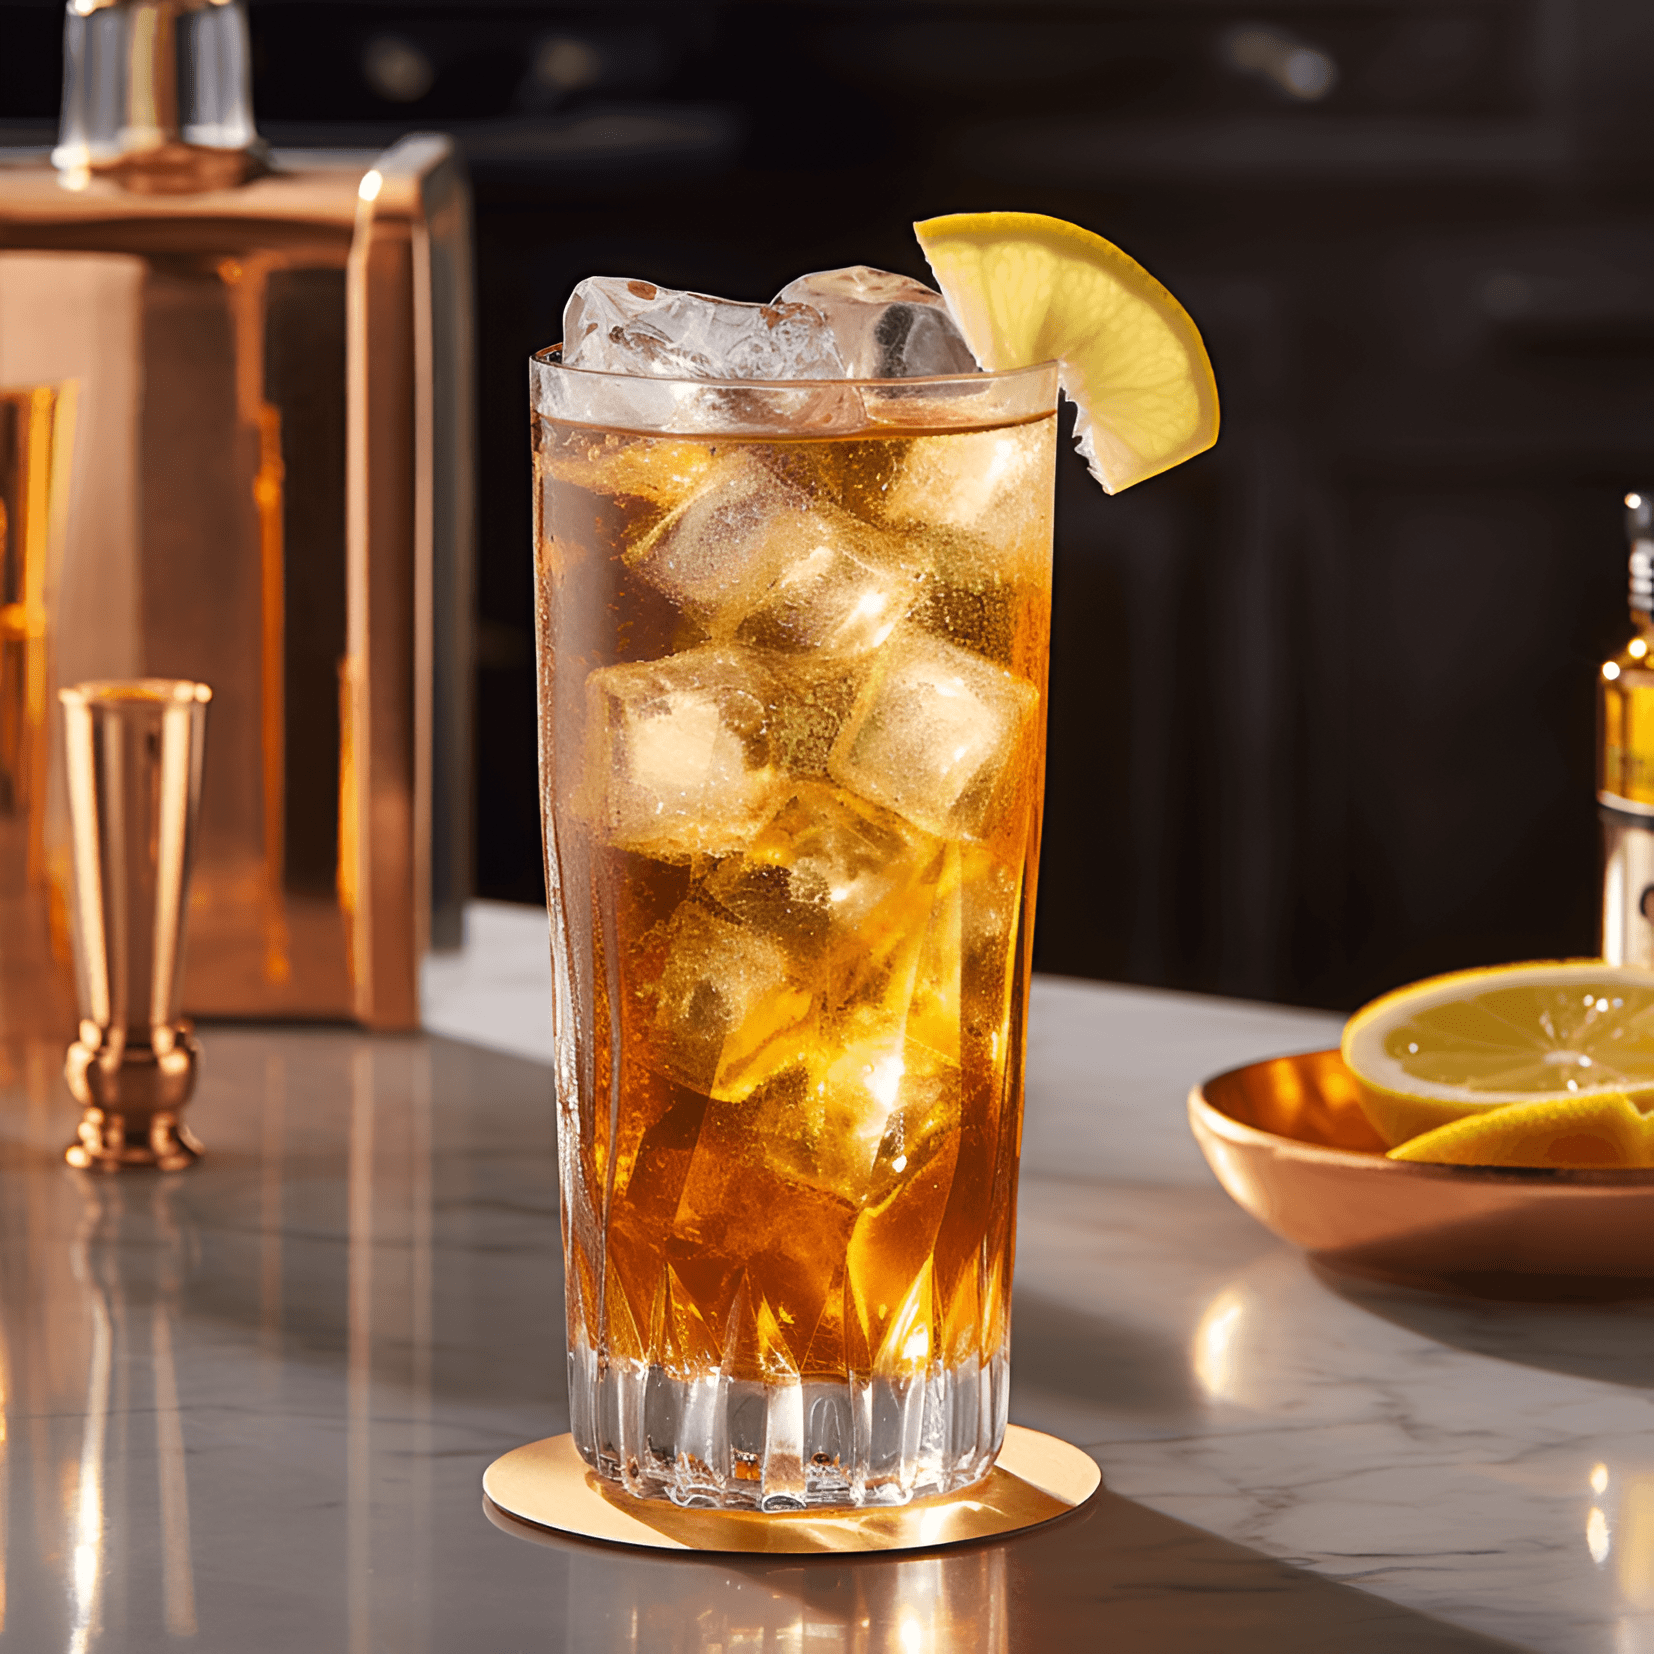 Scotch and Soda Cocktail Recipe - The Scotch and Soda cocktail has a smooth, slightly sweet, and smoky taste with a hint of effervescence from the soda water. The drink is well-balanced, with the soda water lightening the intensity of the Scotch without overpowering its flavors.